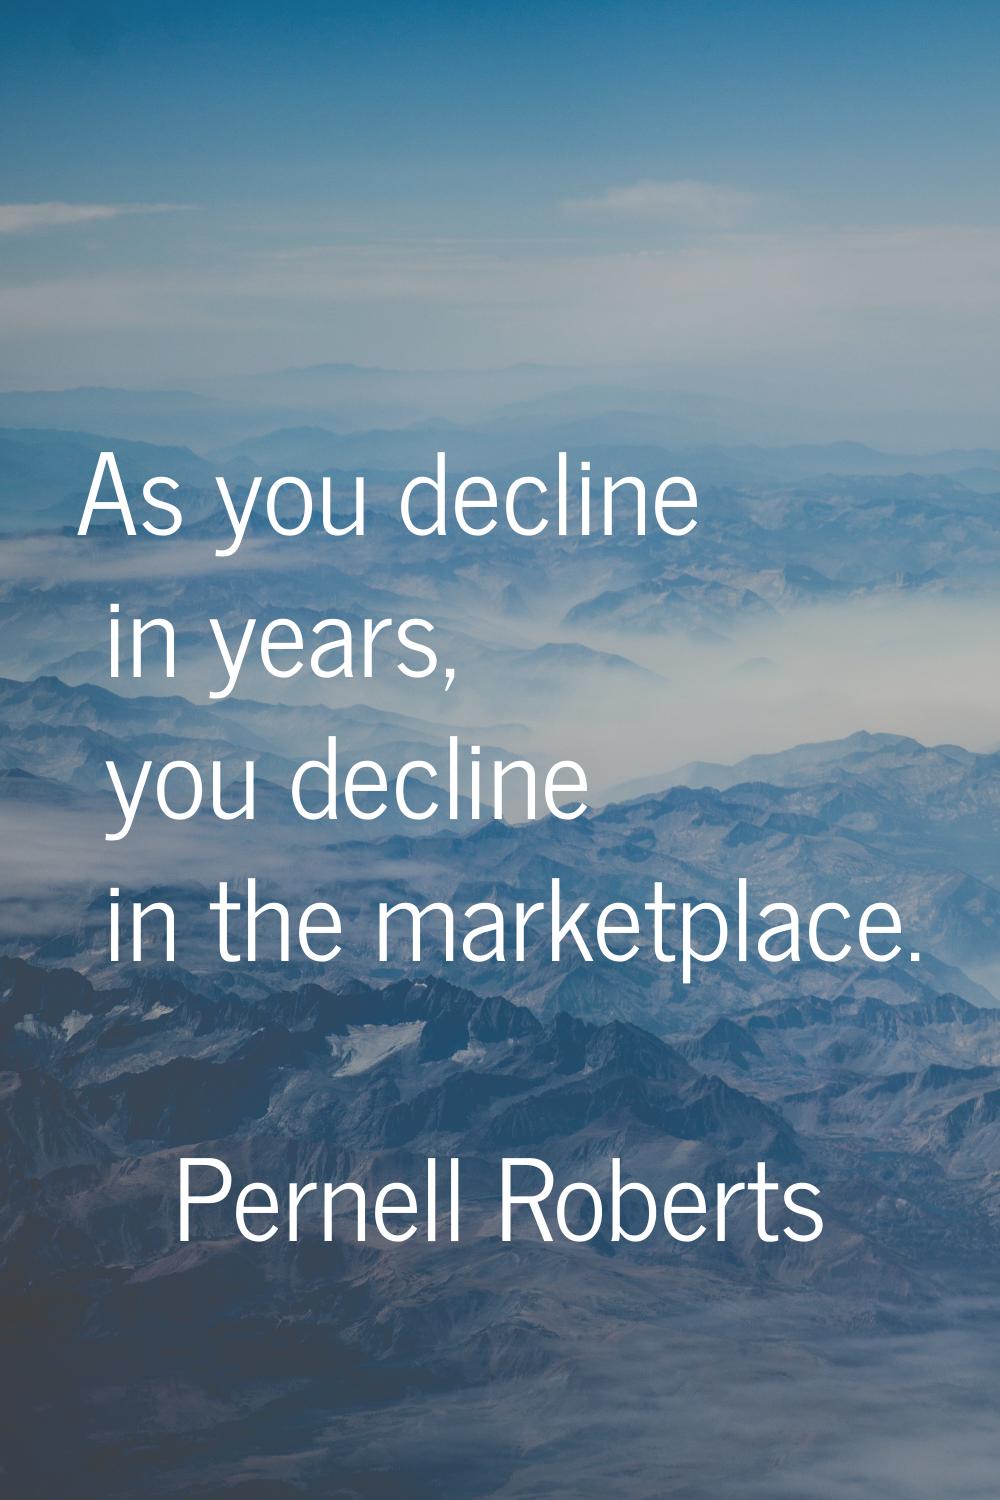 As you decline in years, you decline in the marketplace.